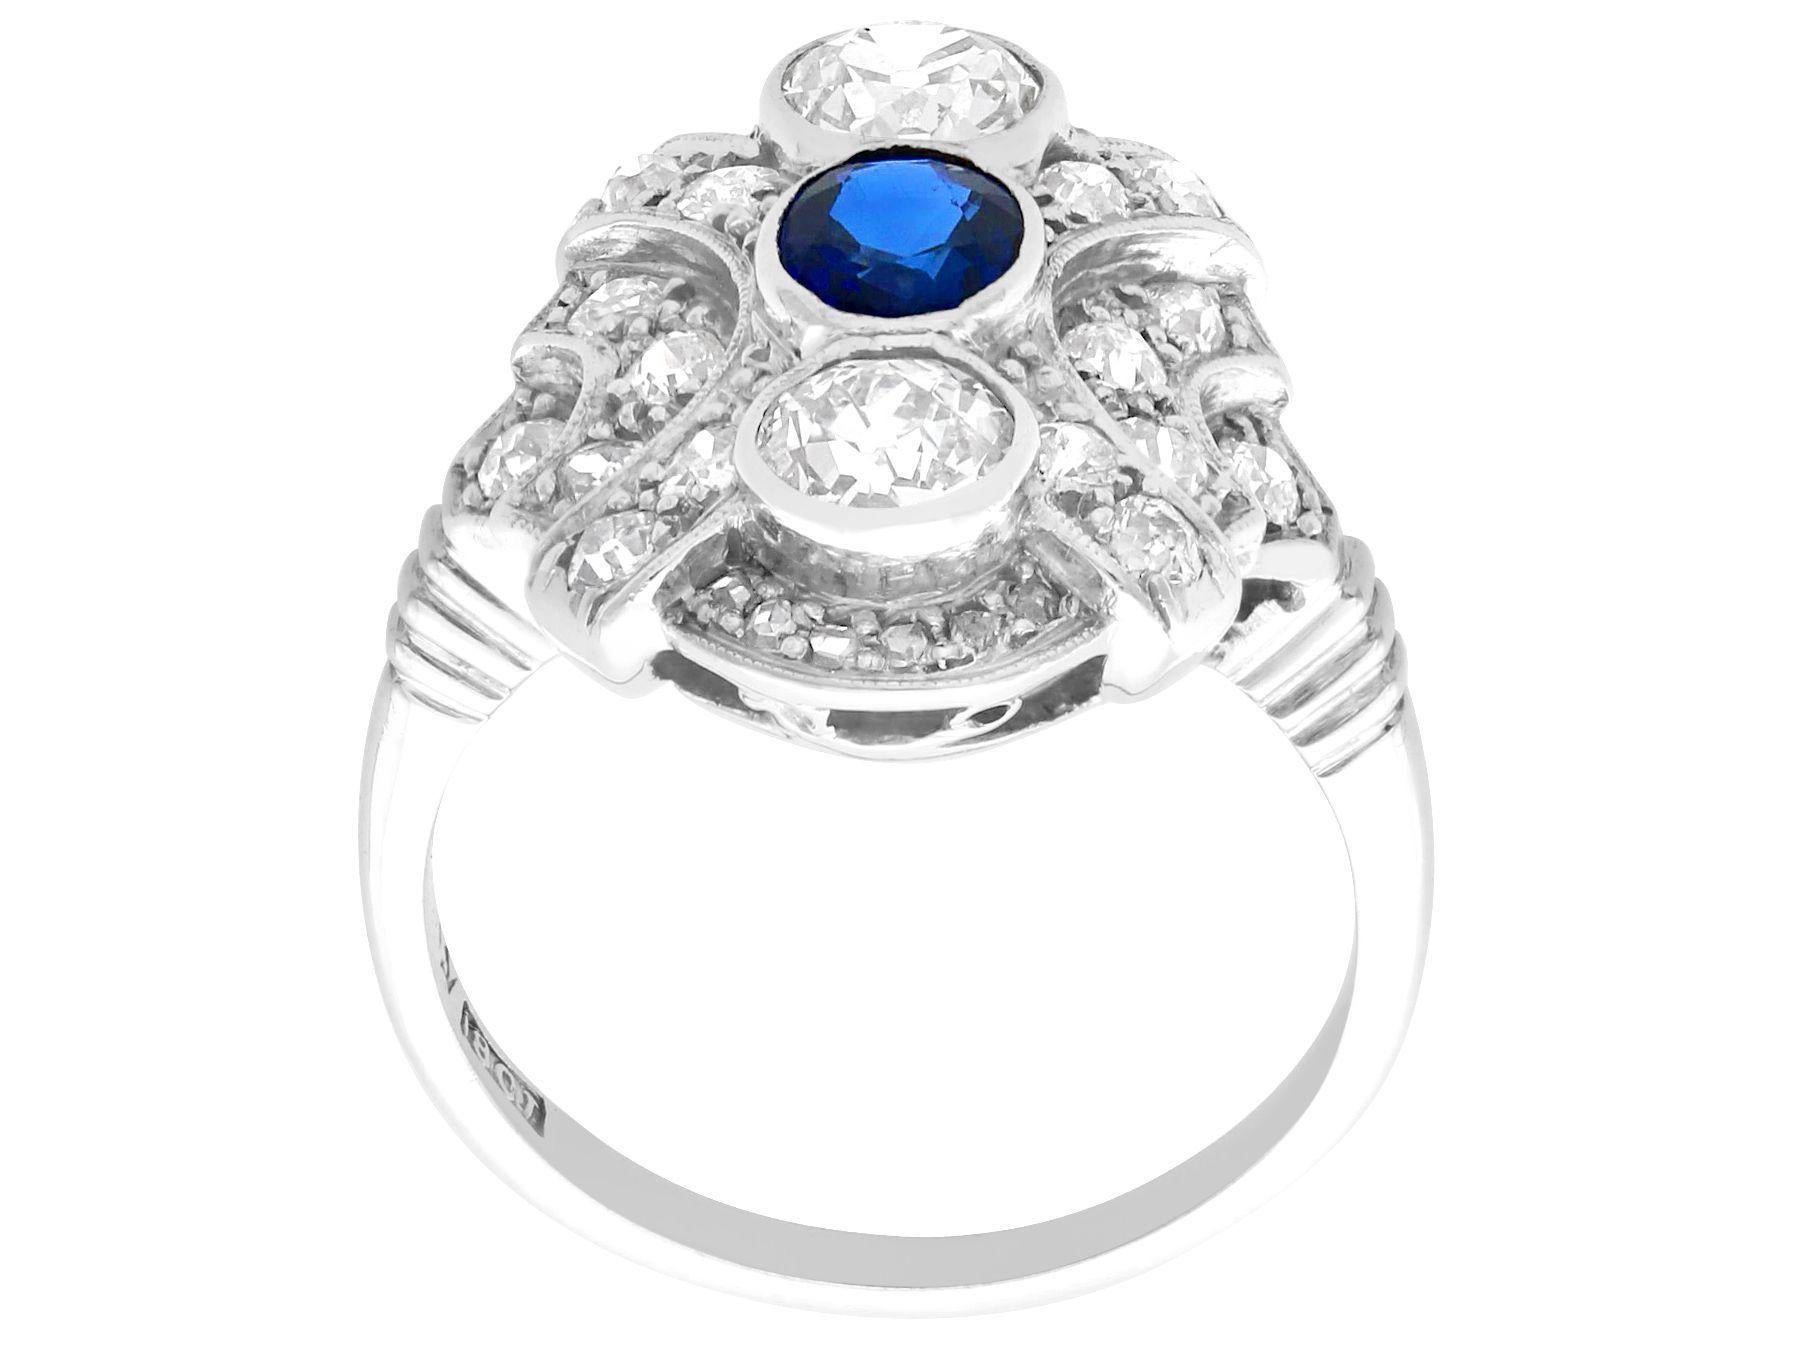 Women's or Men's Antique Sapphire and 1.64 Carat Diamond White Gold Cocktail Ring, circa 1935 For Sale